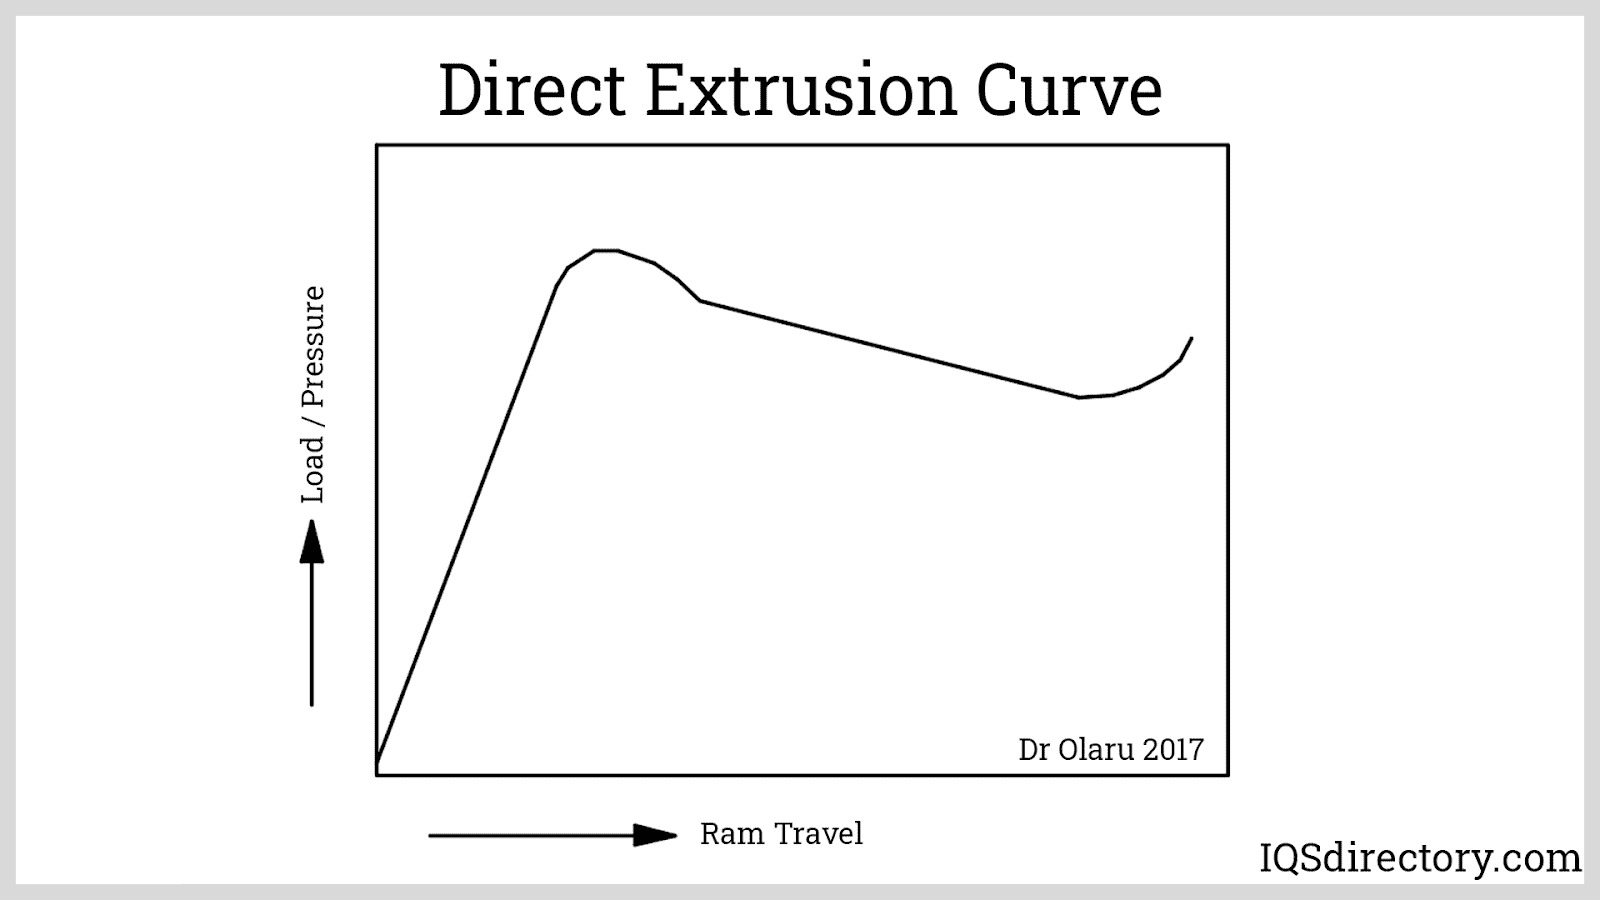 Direct Extrusion Curve